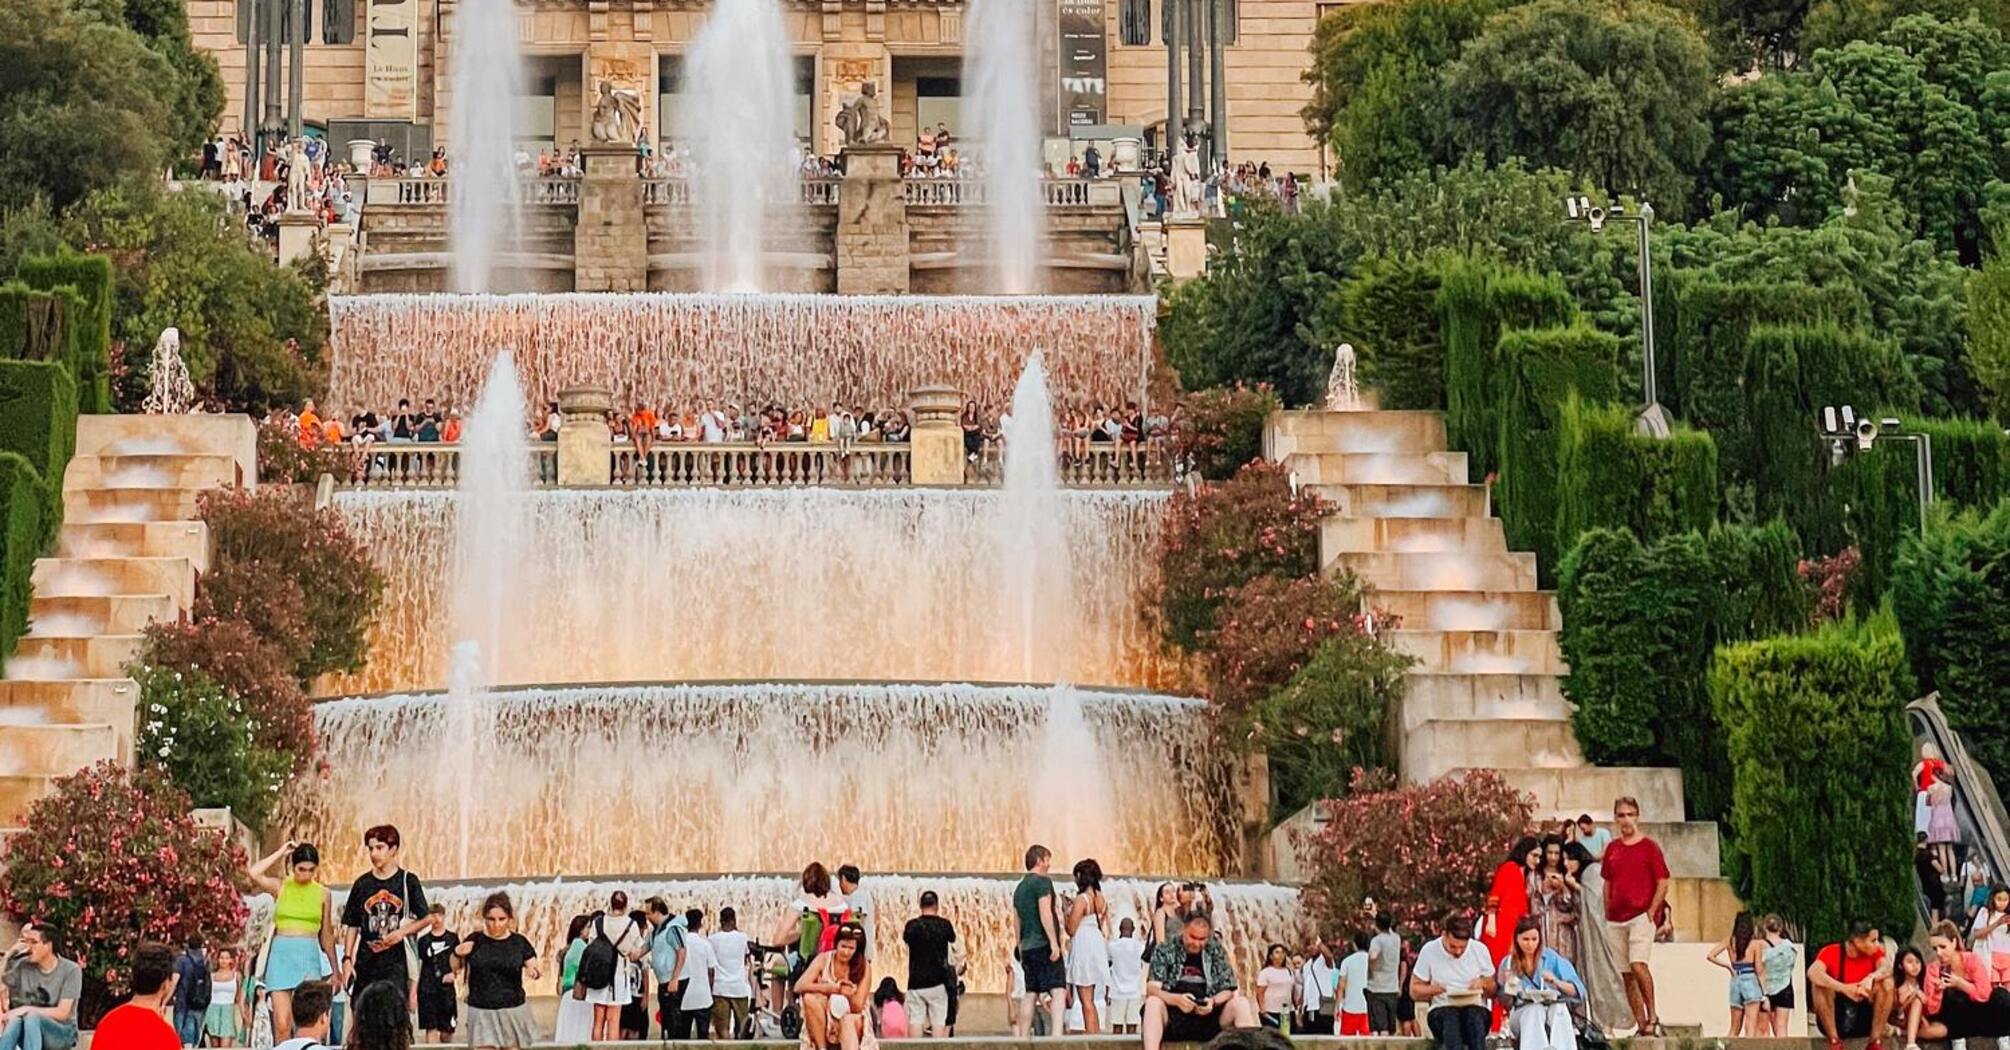 Famous Spanish resort disappoints visitors due to crowds of tourists